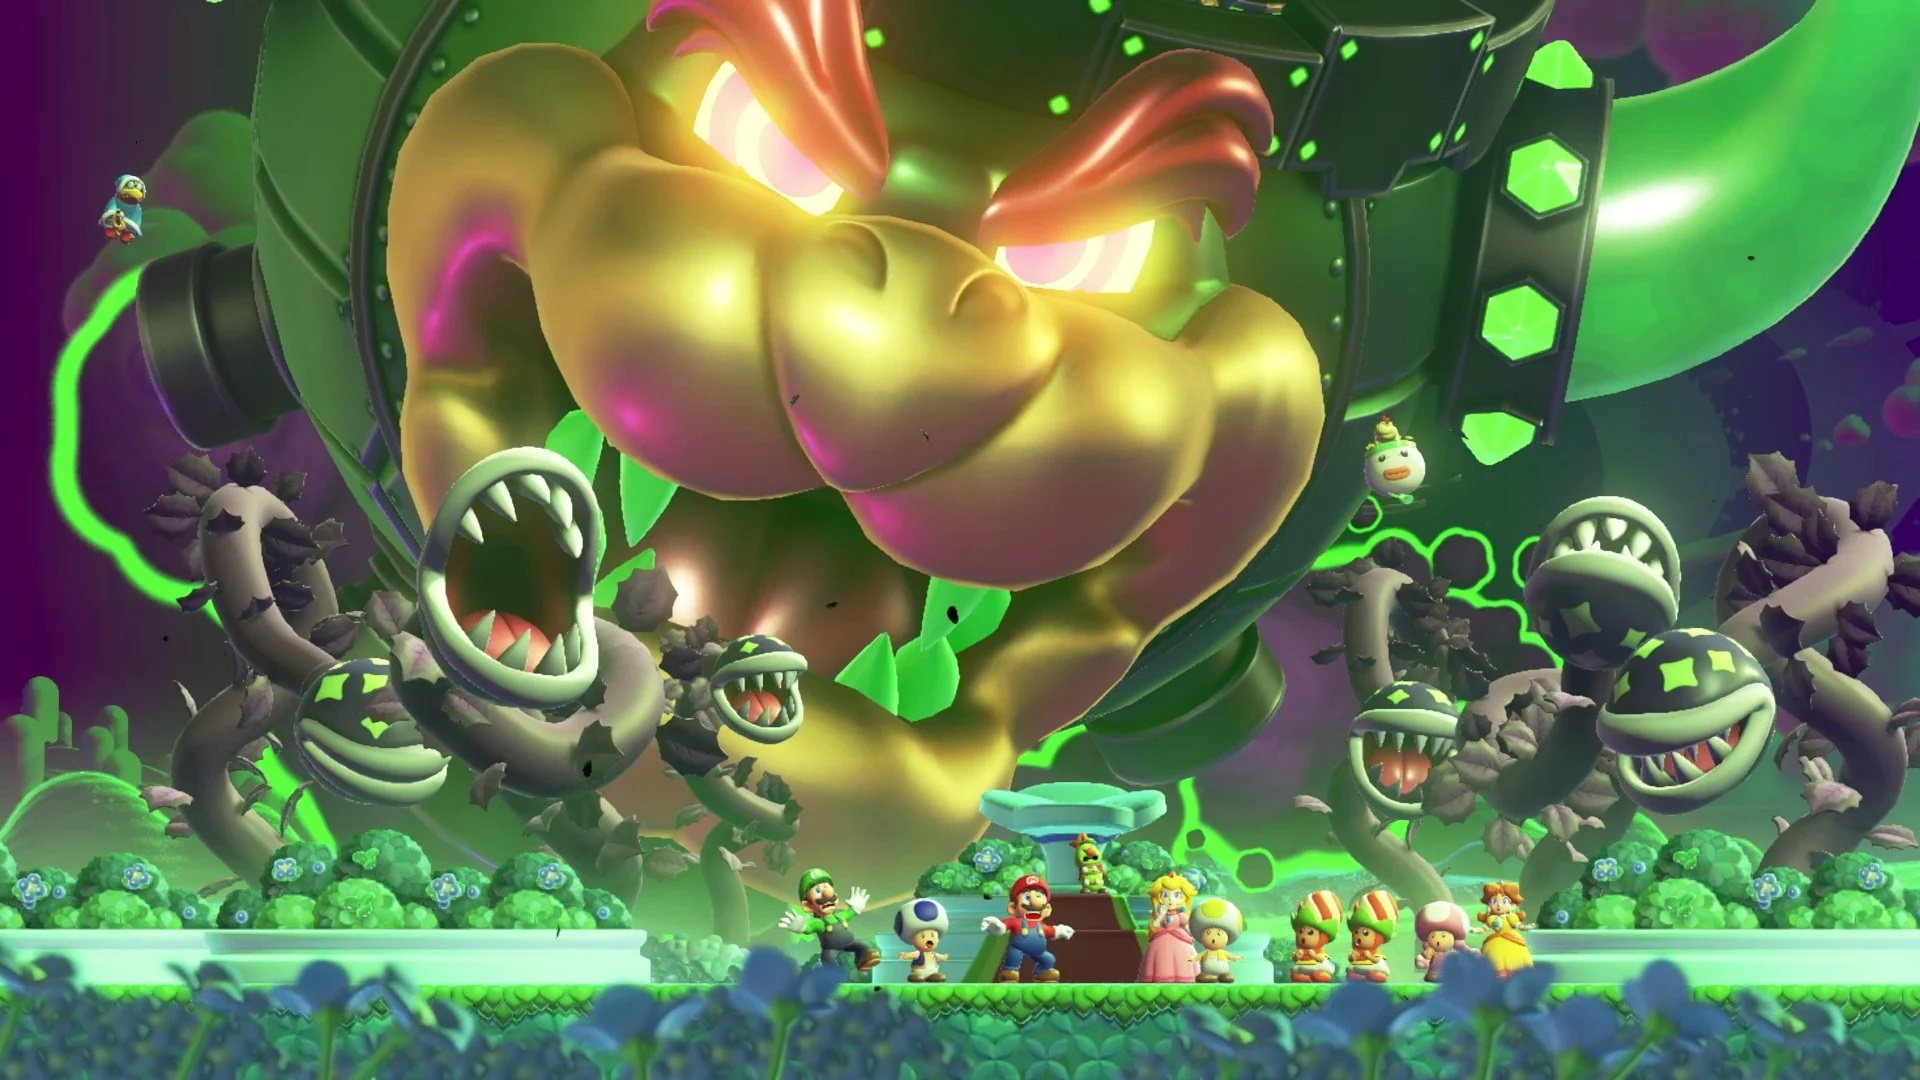 Bowser transforms himself into a heavy-metal-loving sentient castle in Super Mario Bros. Wonder, a new game on the Nintendo Switch. Photo: Nintendo